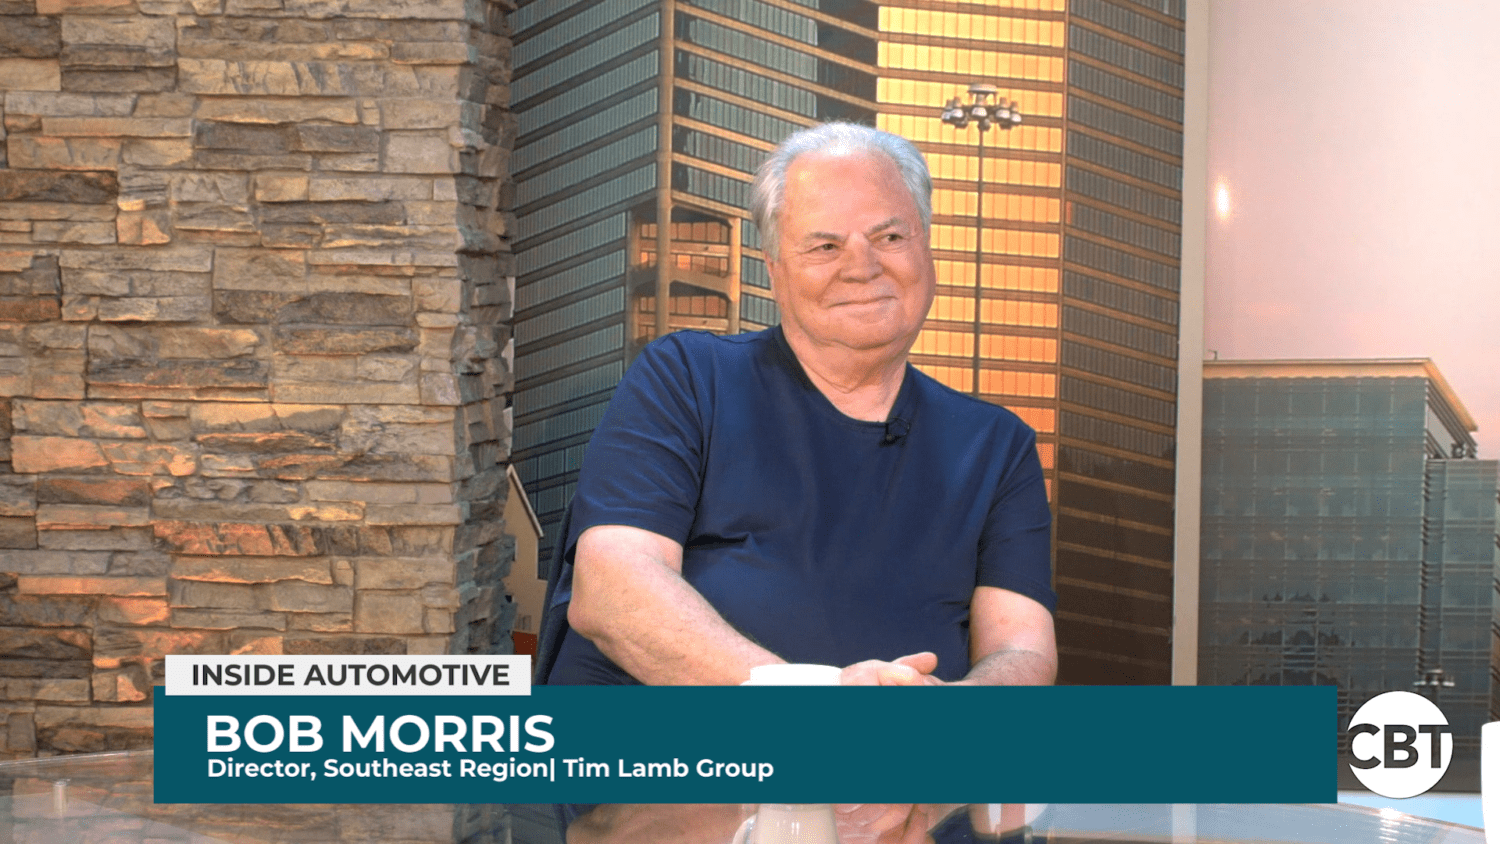 Bob Morris joins Inside Automotive to discuss a new EV brand titled ARRA, which aims to leverage franchised dealers in the U.S.